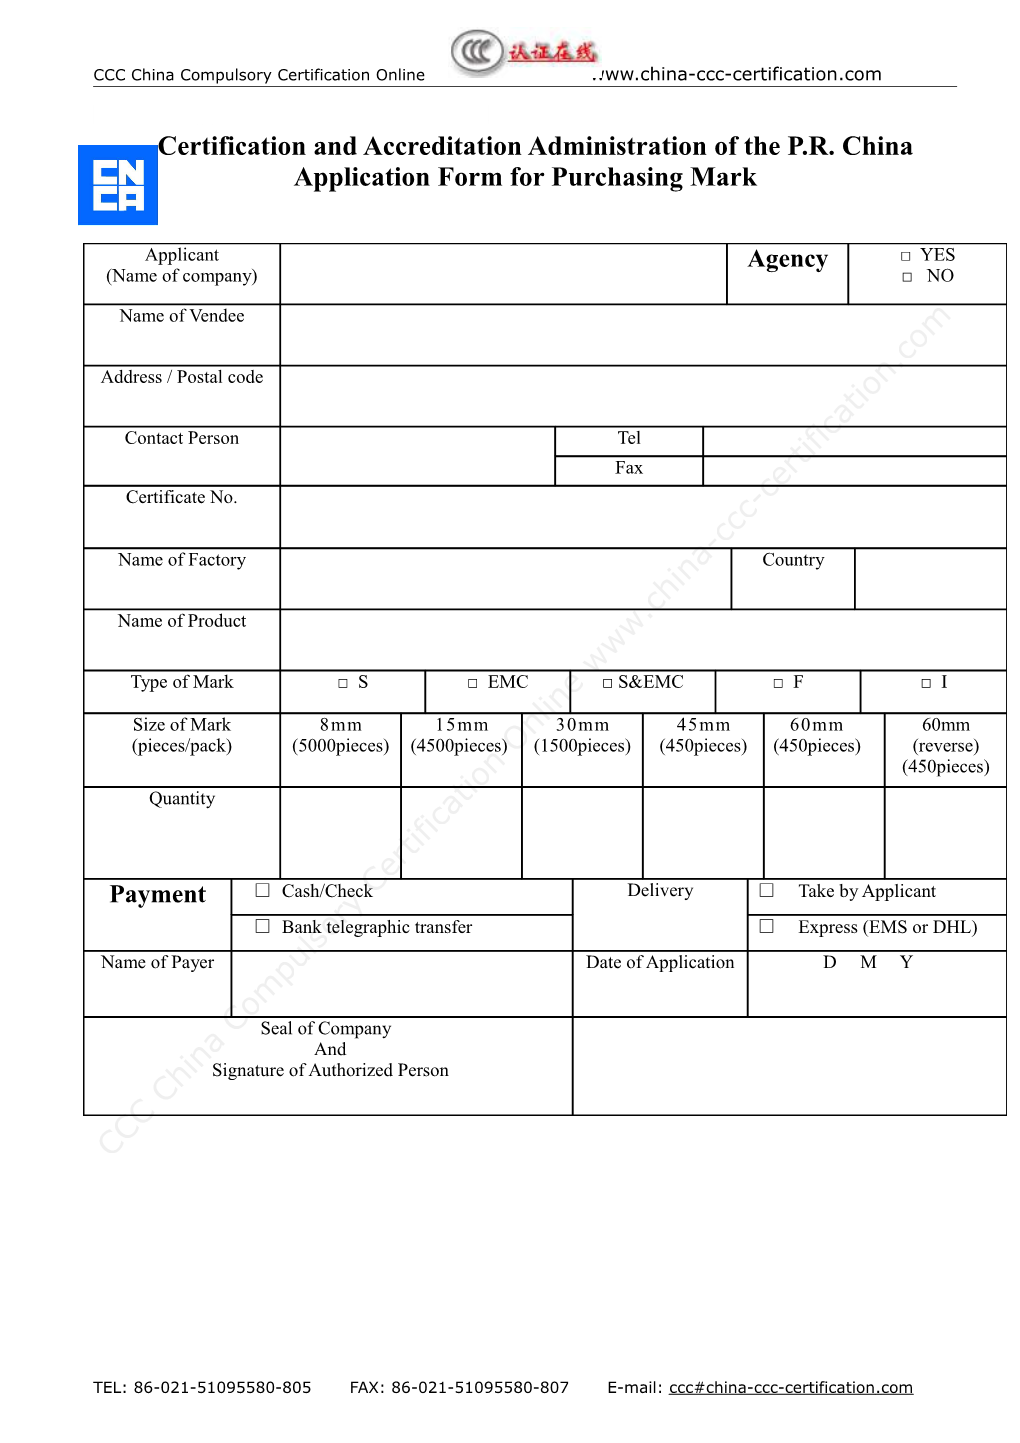 CCC Mark Application,Purchase CCC Mark Form